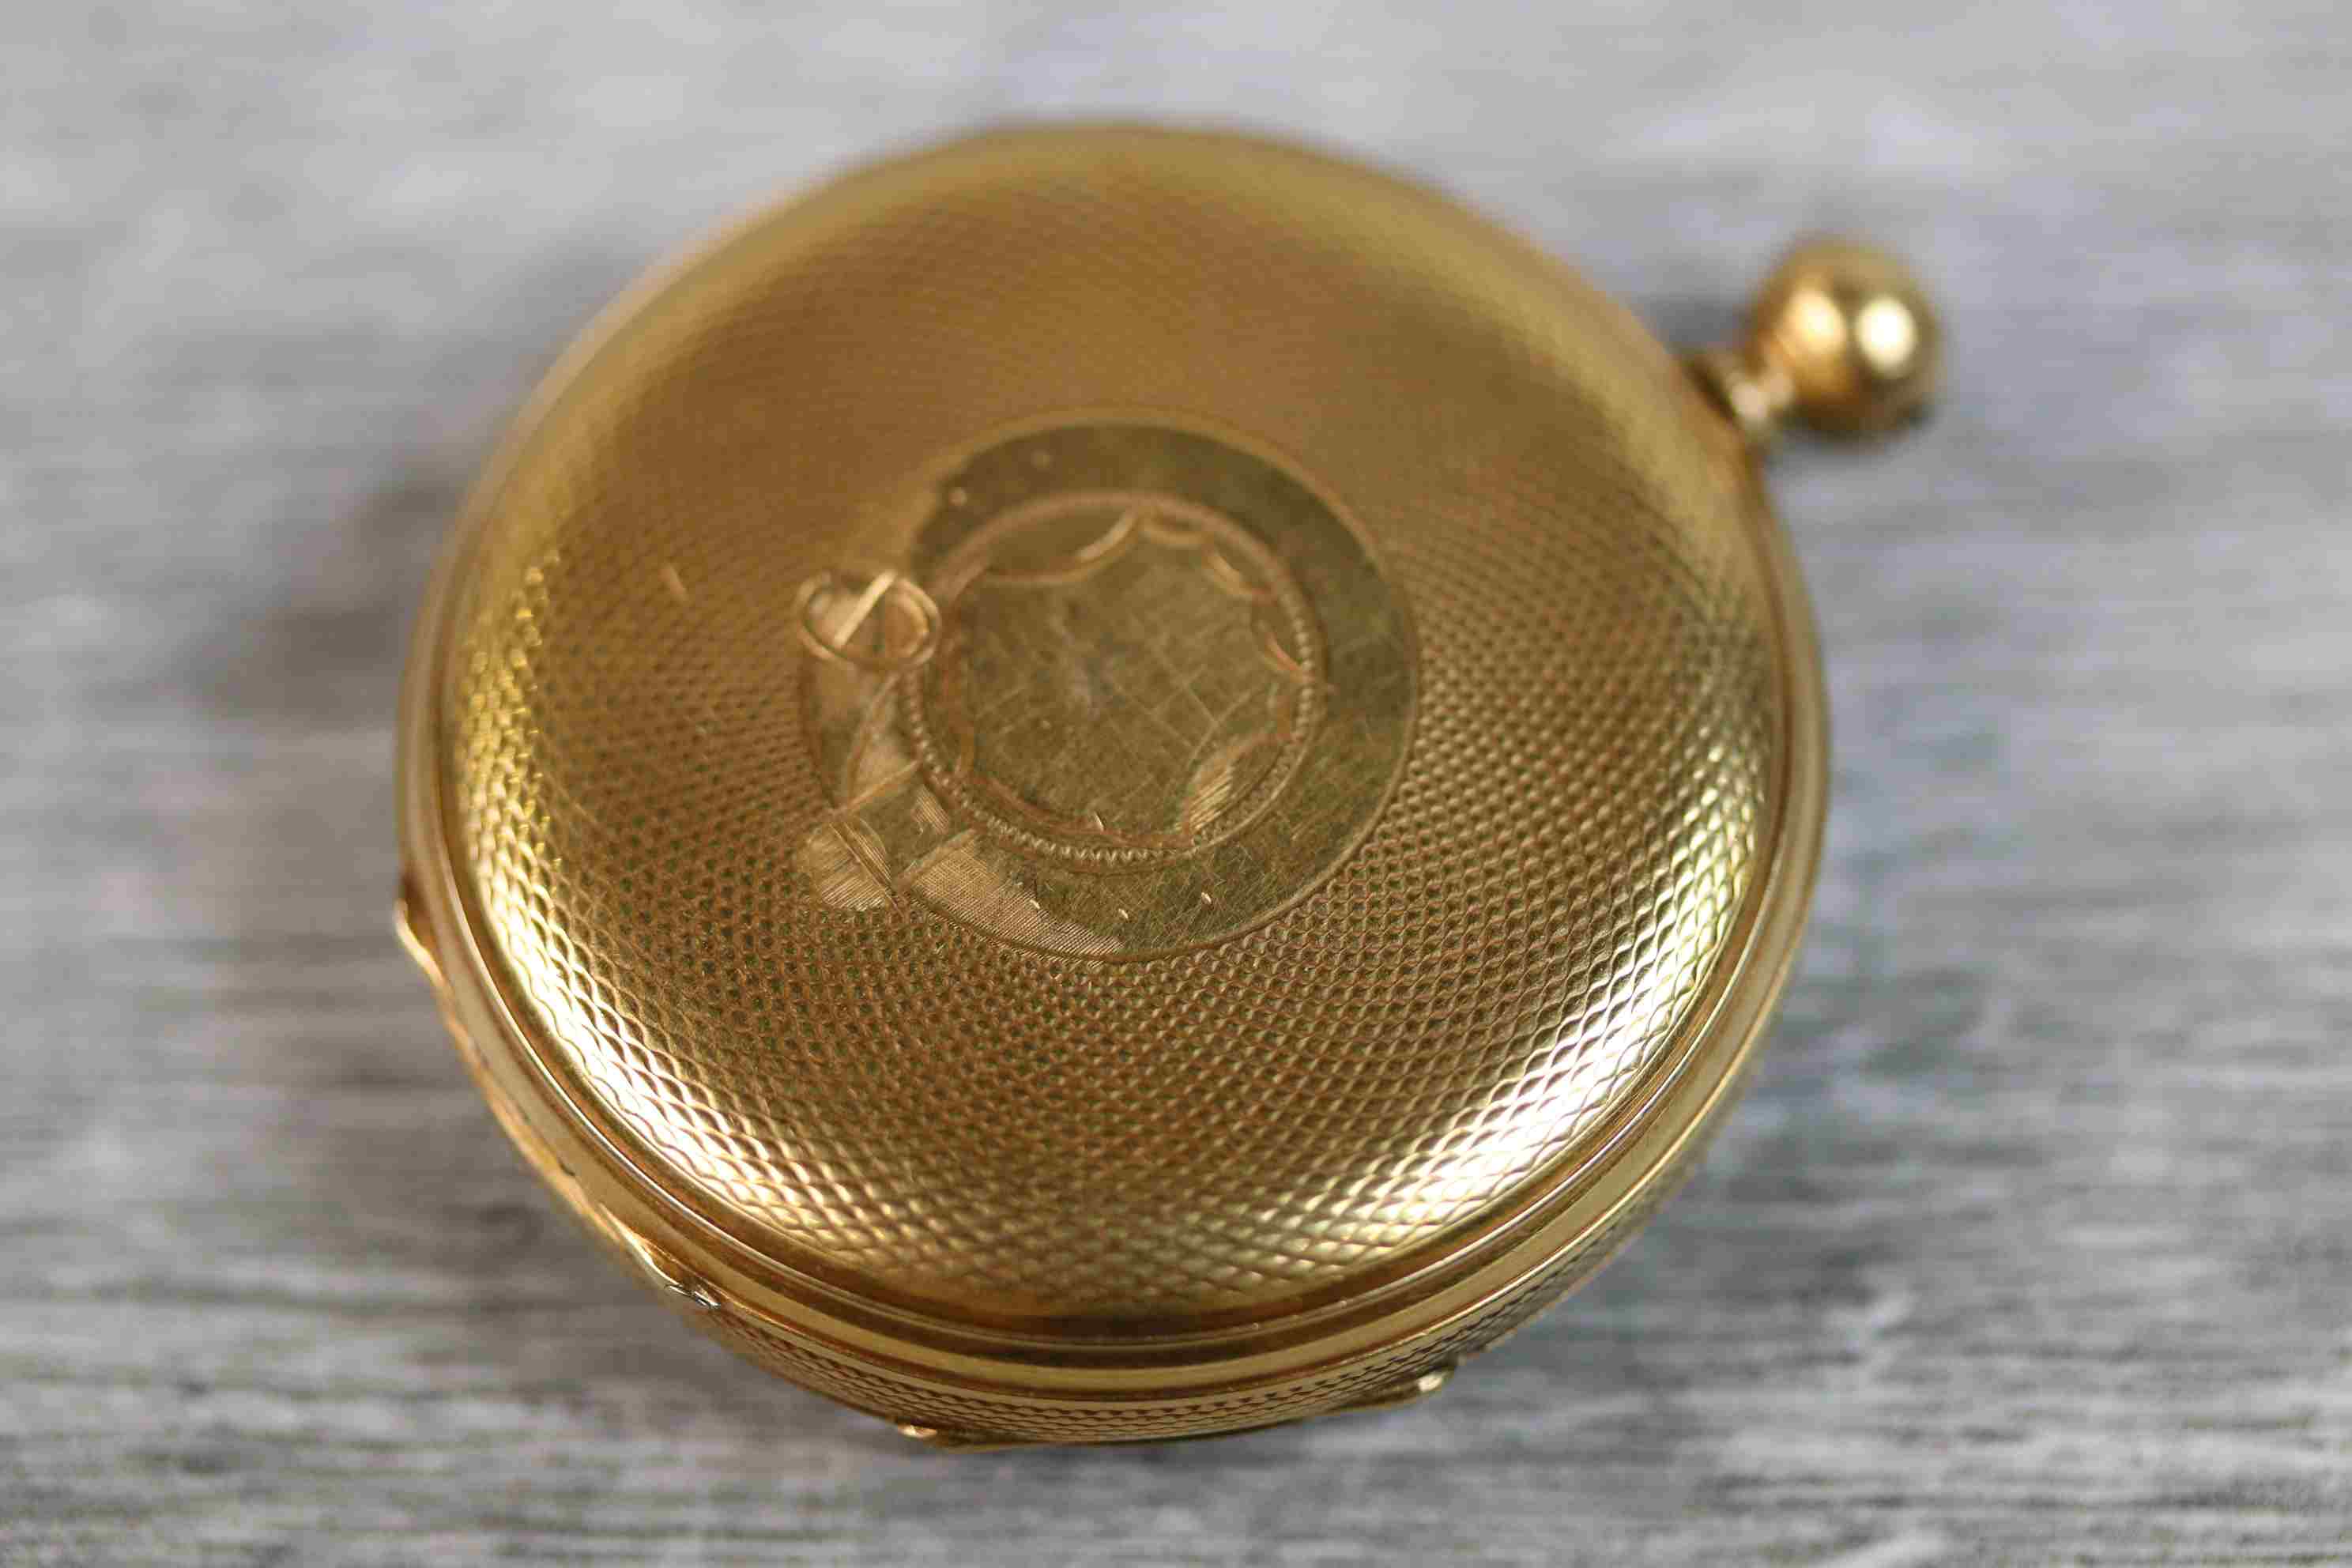 18ct yellow gold open faced key wind pocket watch, gilt engine turned dial and subsidiary dial, - Image 6 of 6